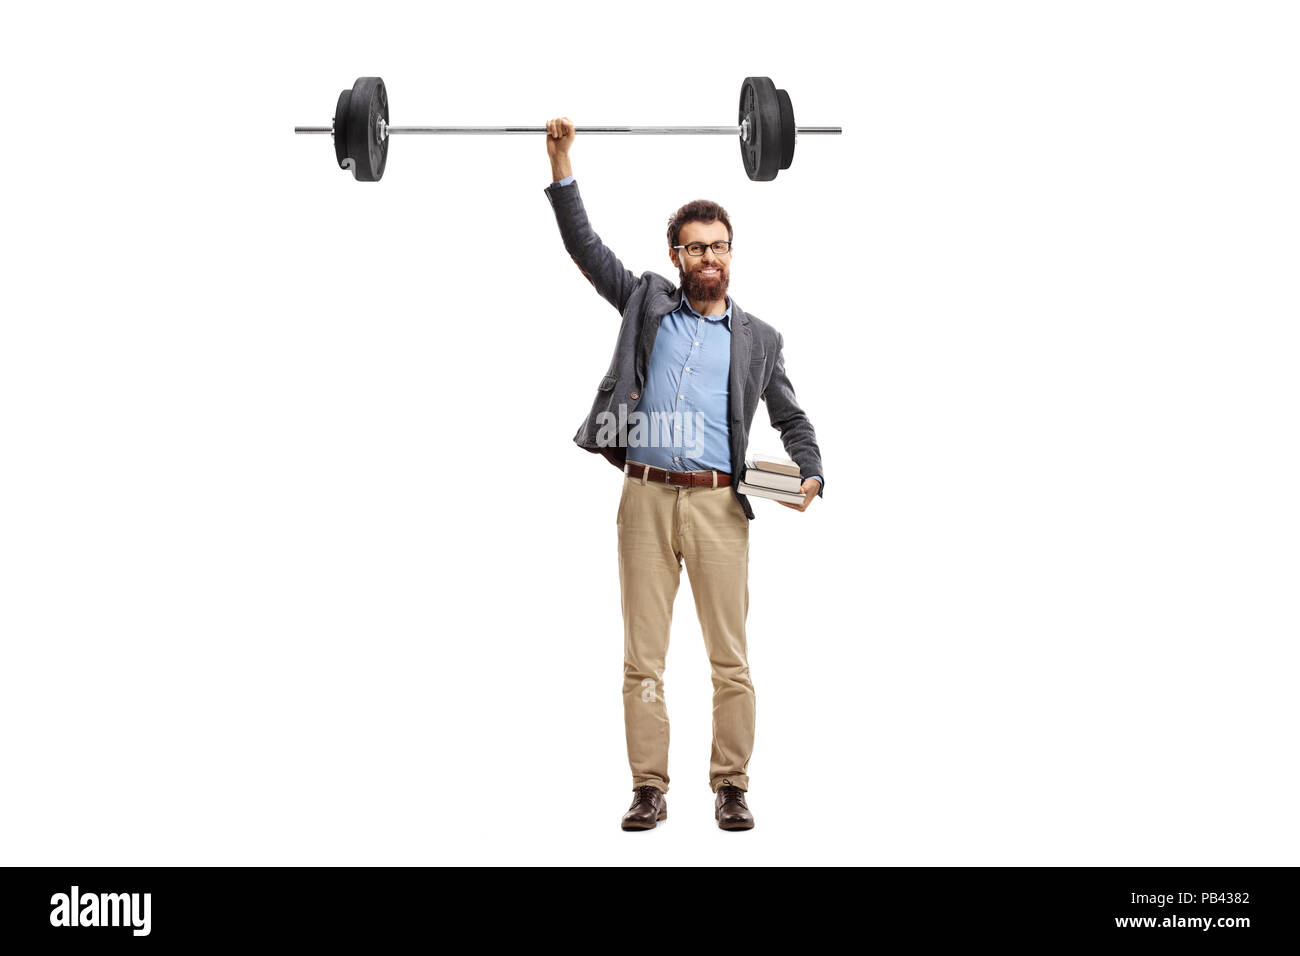 Full length portrait of a professor lifting a barbell with one hand isolated on white background Stock Photo